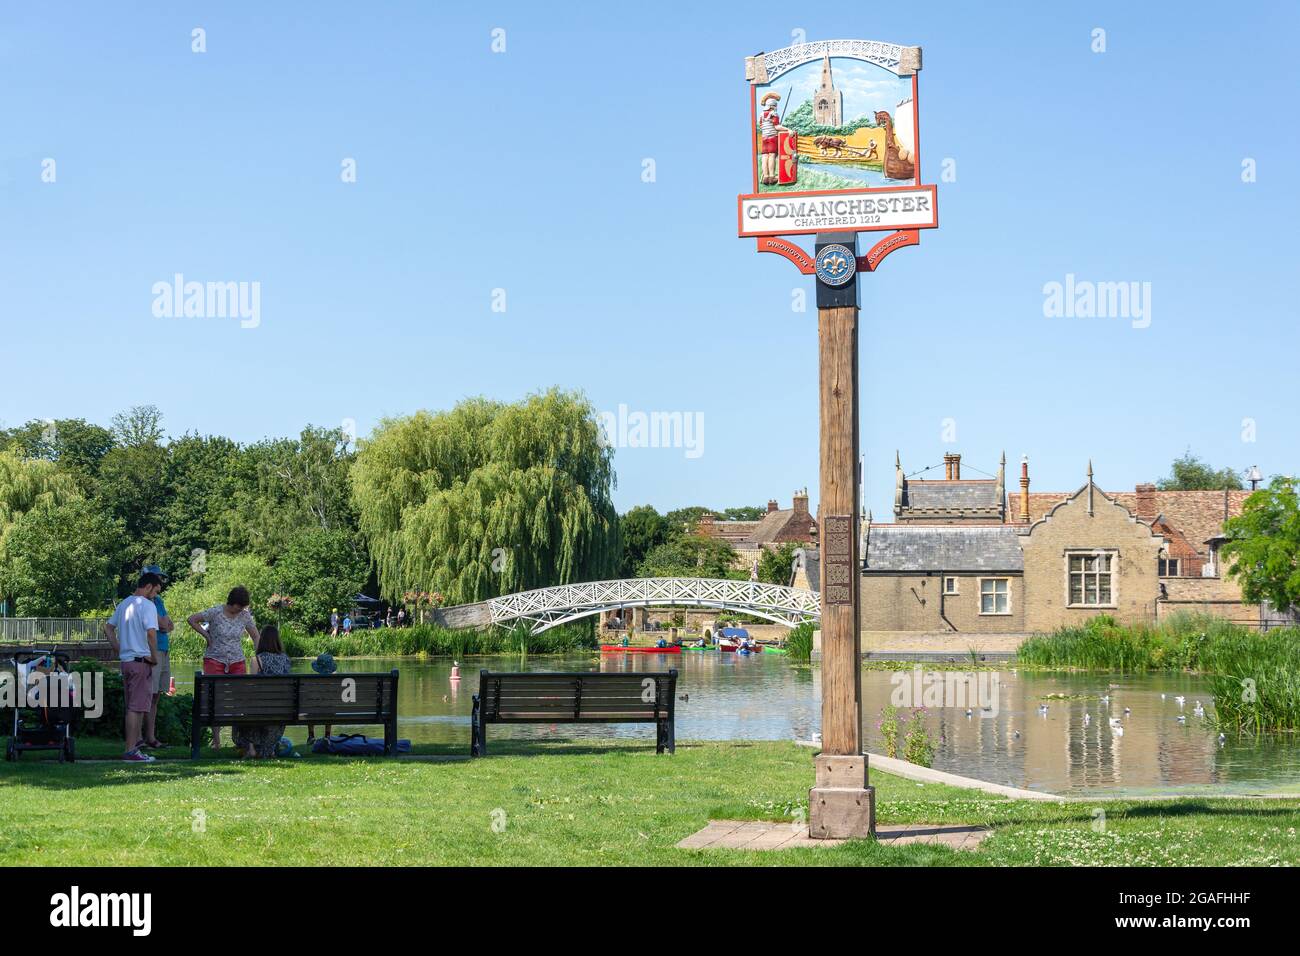 Town sign by River Great Ouse, The Causeway, Godmanchester, Cambridgeshire, England, United Kingdom Stock Photo